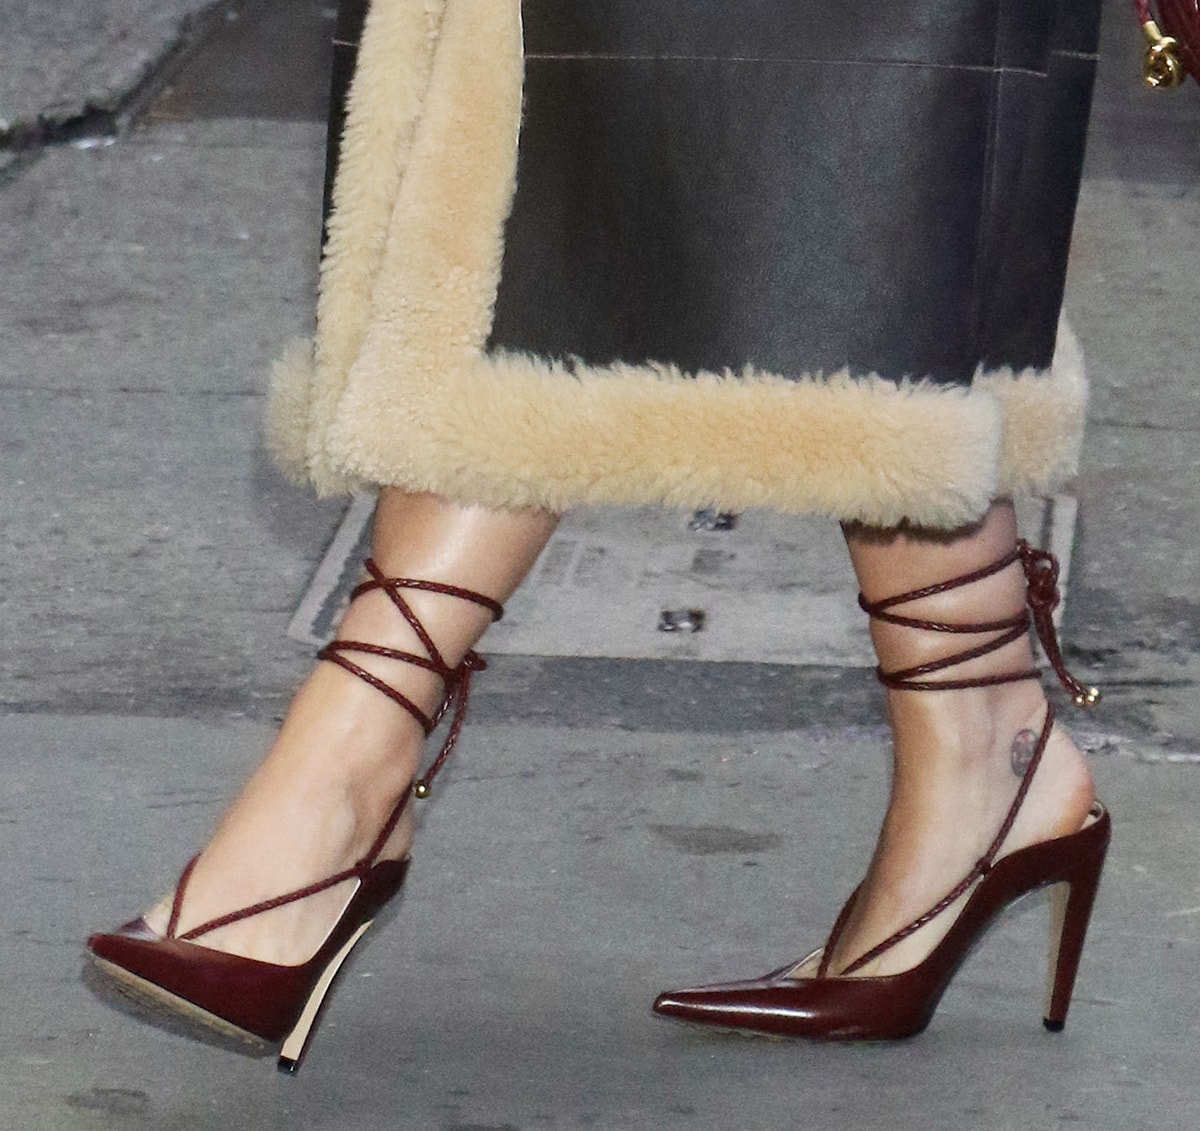 Katy Perry teams her brown coat with the Bottega Veneta Spritz pumps, featuring braided cords, pointed toes, and high heels